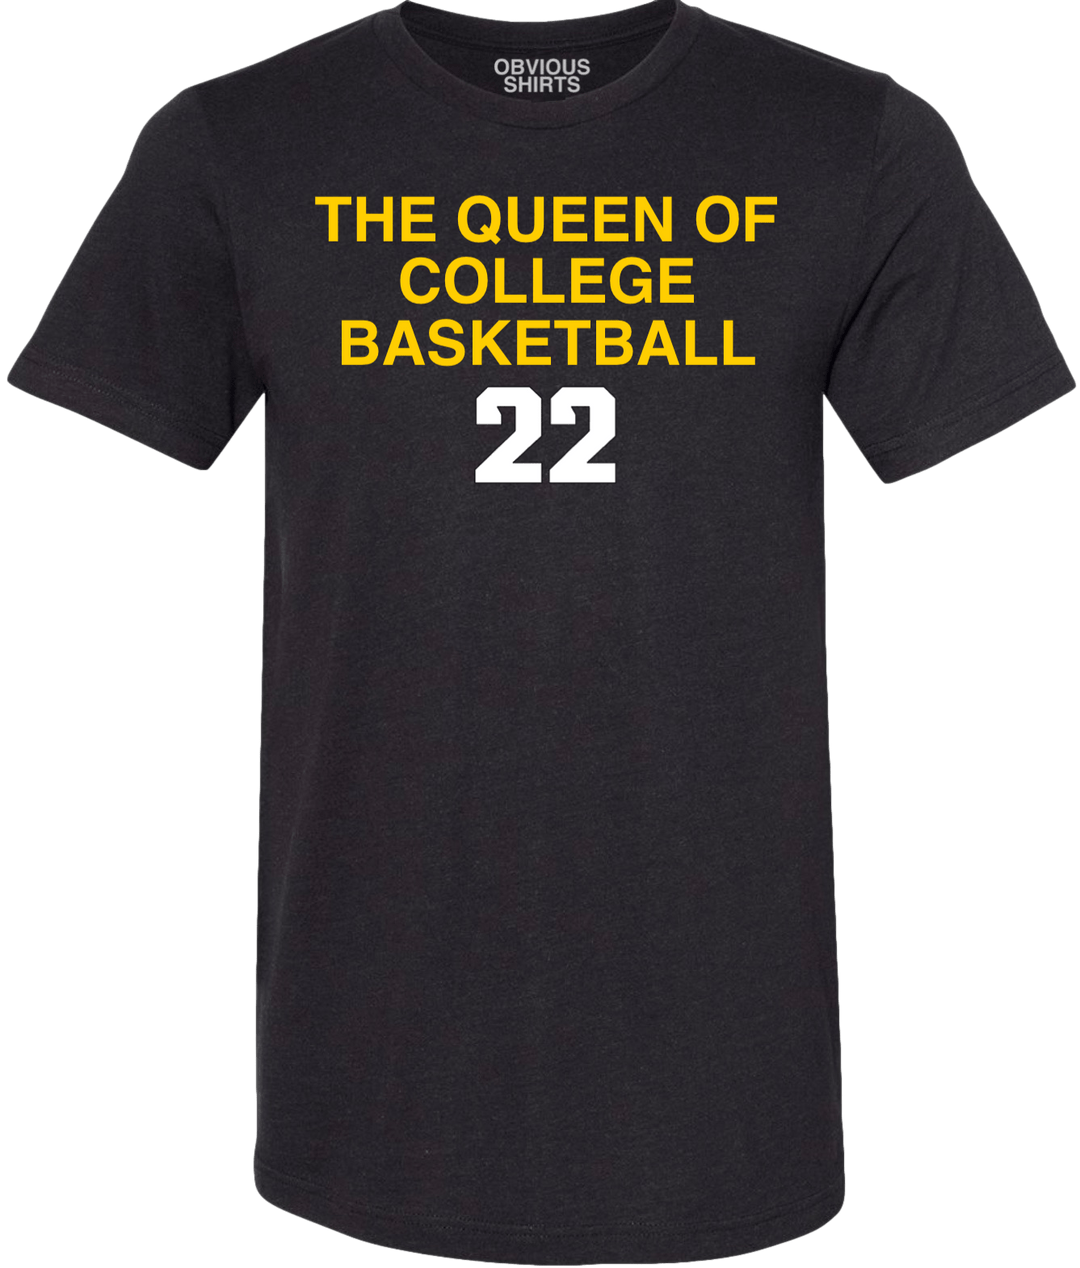 THE QUEEN OF COLLGE BASKETBALL. - OBVIOUS SHIRTS